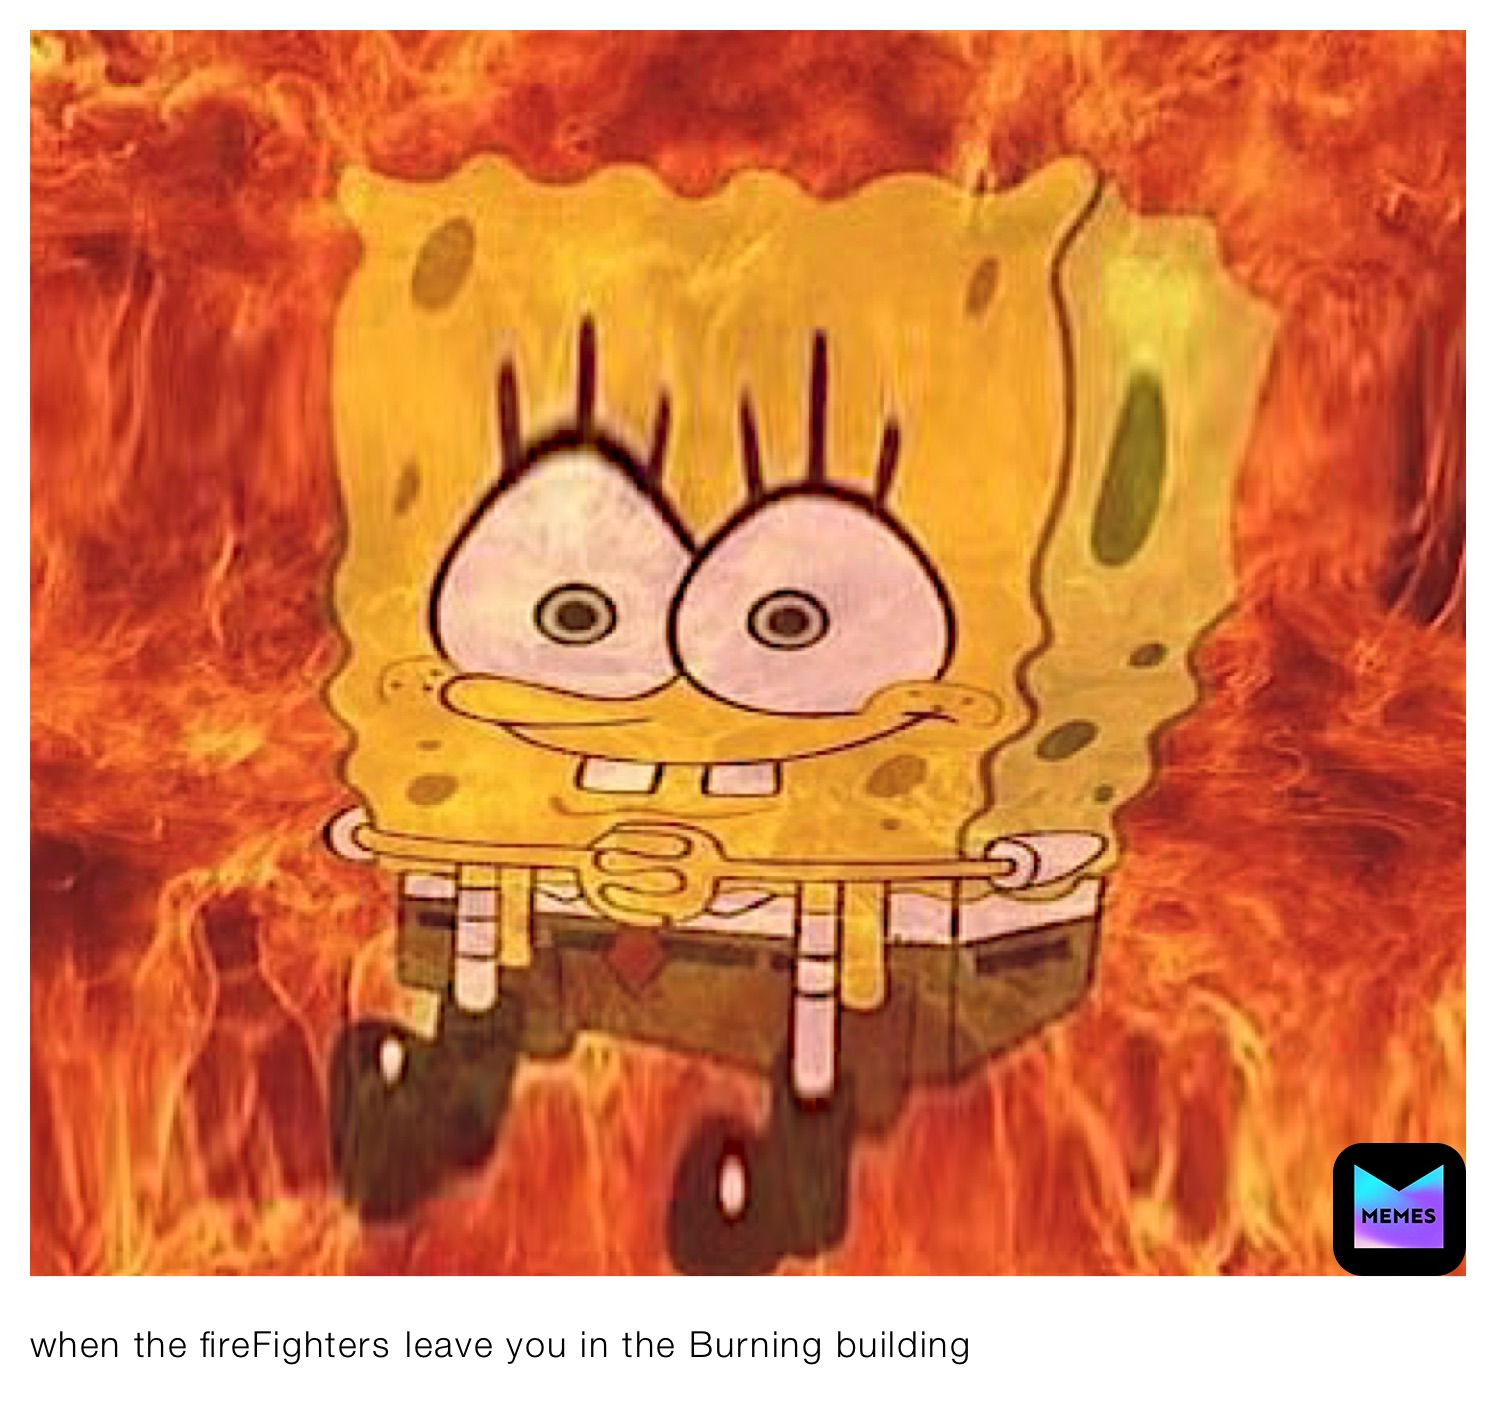 when the fireFighters￼ leave you in the Burning building￼ | @cursed_rengoku  | Memes